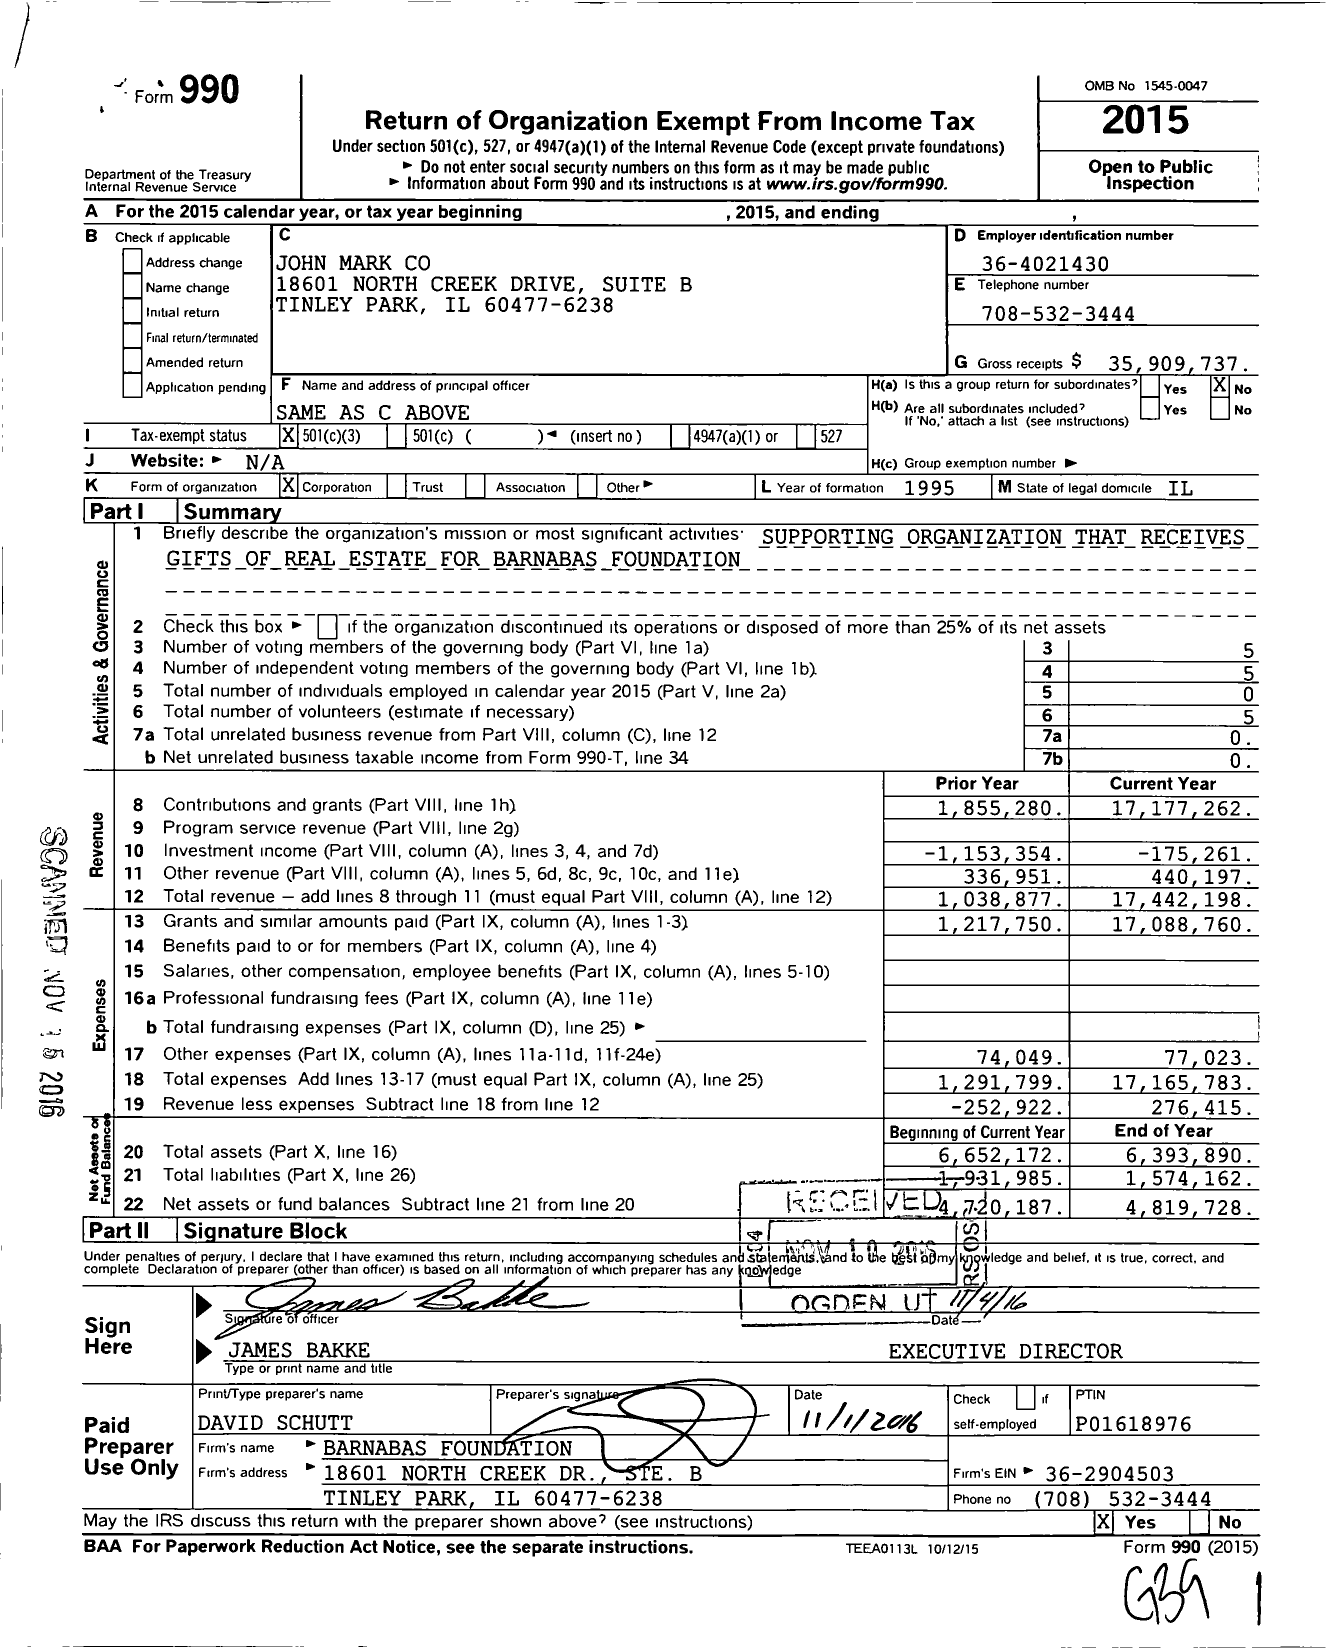 Image of first page of 2015 Form 990 for John Mark Co